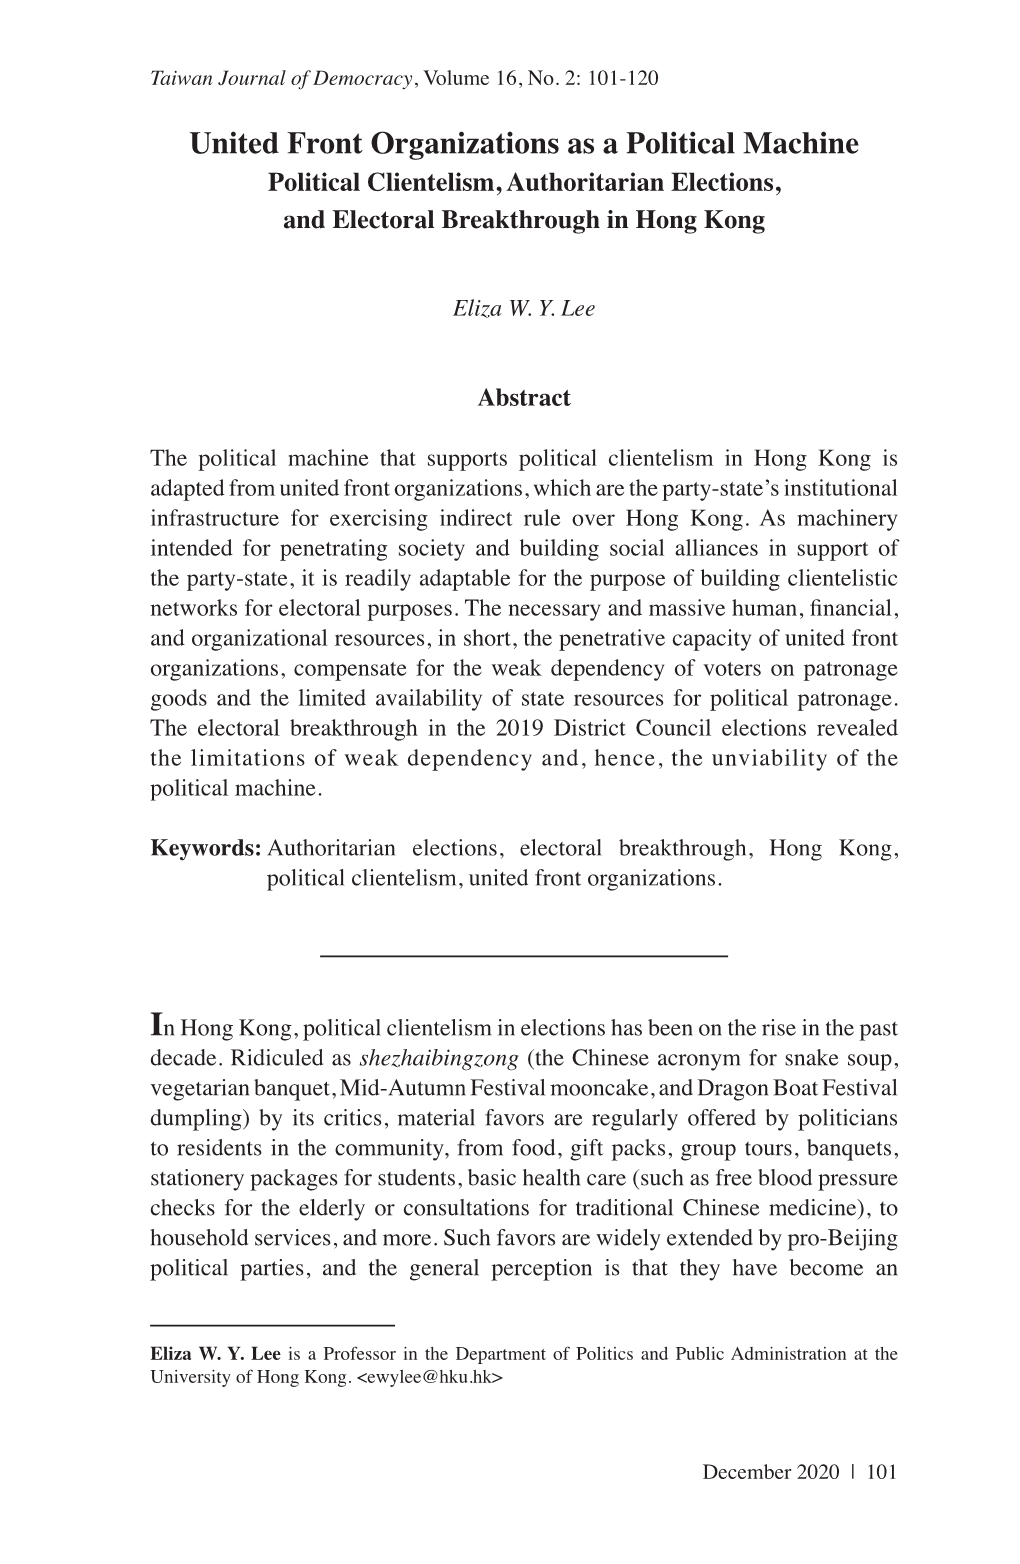 United Front Organizations As a Political Machine Political Clientelism, Authoritarian Elections, and Electoral Breakthrough in Hong Kong